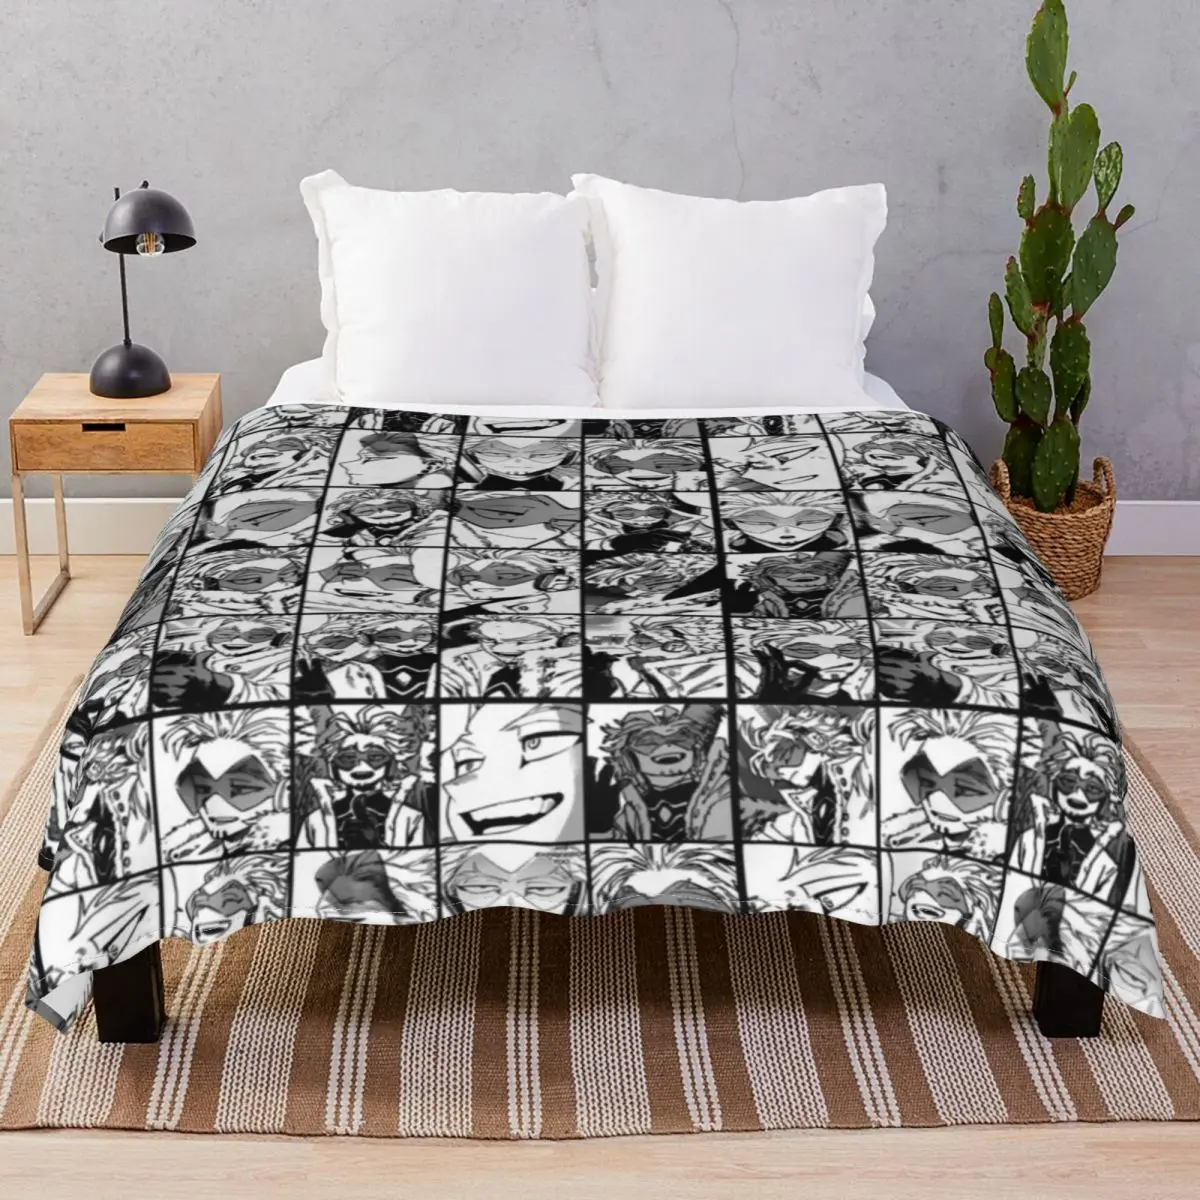 Hawks Manga Black And White Version Blanket Fleece Winter Lightweight Thin Throw Blankets for Bedding Home Couch Travel Cinema